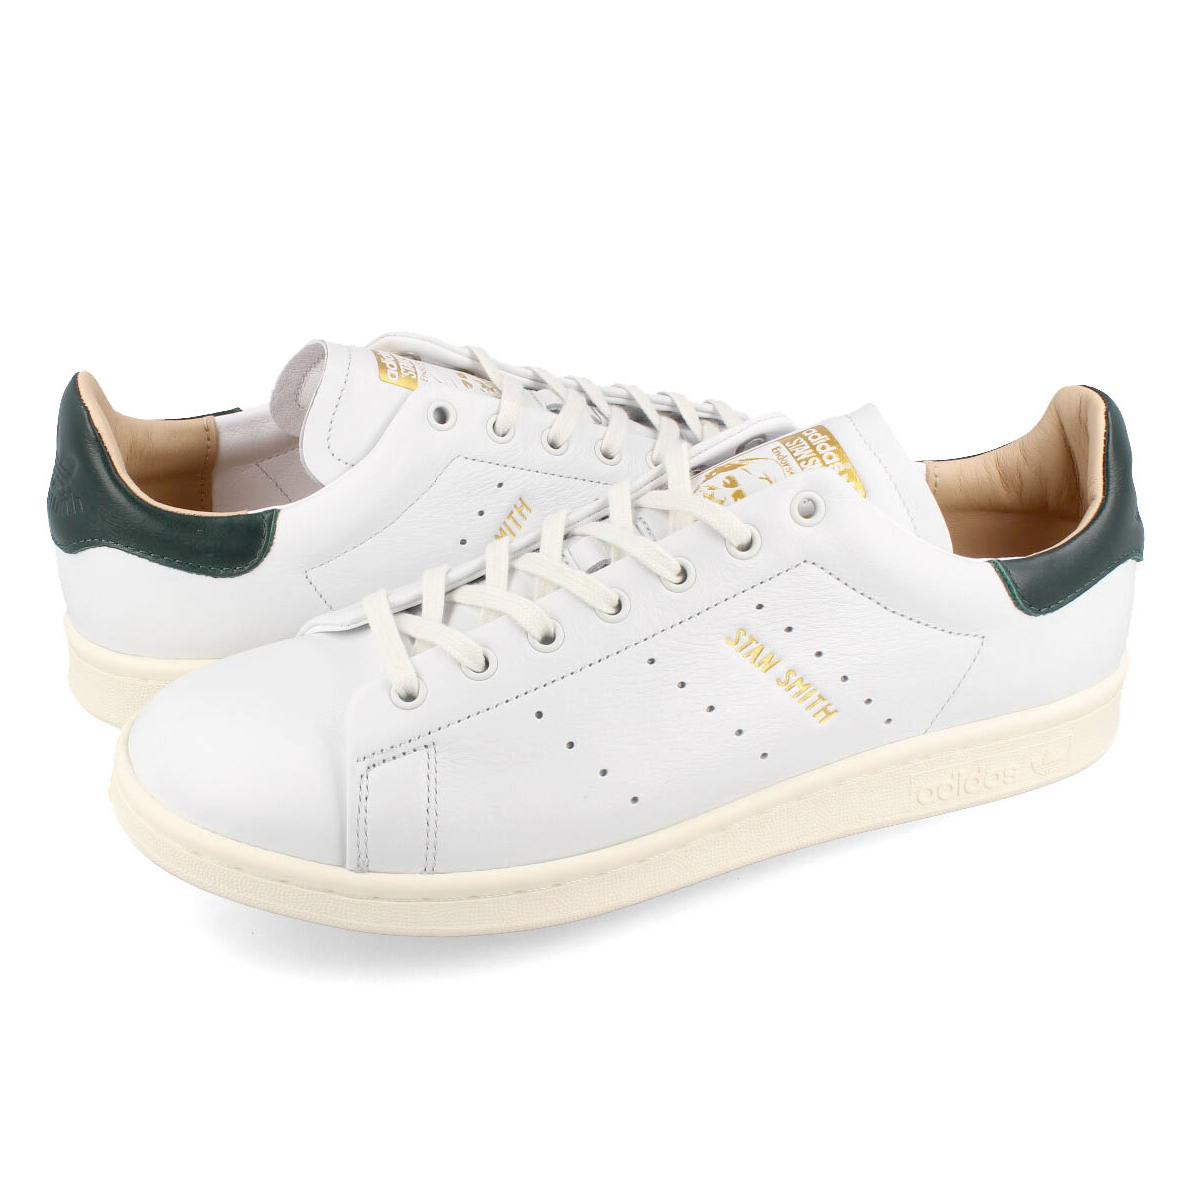 adidas STAN SMITH LUX CRYSTAL WHITE/OFF WHITE/CORE BLACK : hq6785 